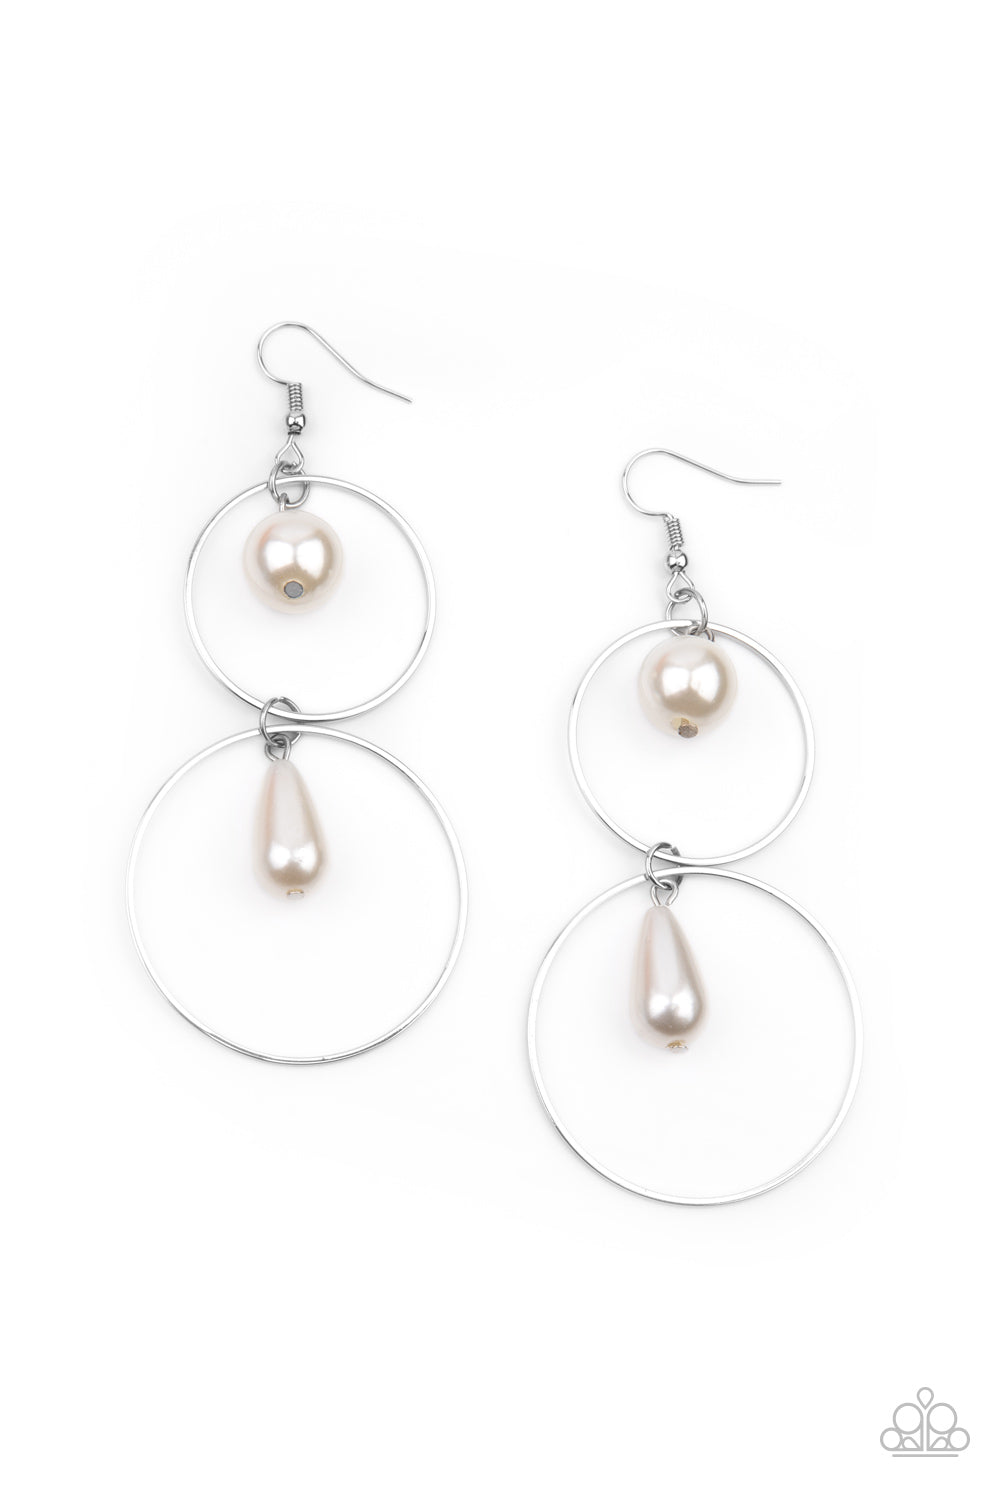 Paparazzi Accessories, white pearl swings from the top of a shiny silver hoop that is linked to another silver hoop by a pearly teardrop bead, creating a stunningly stacked display.